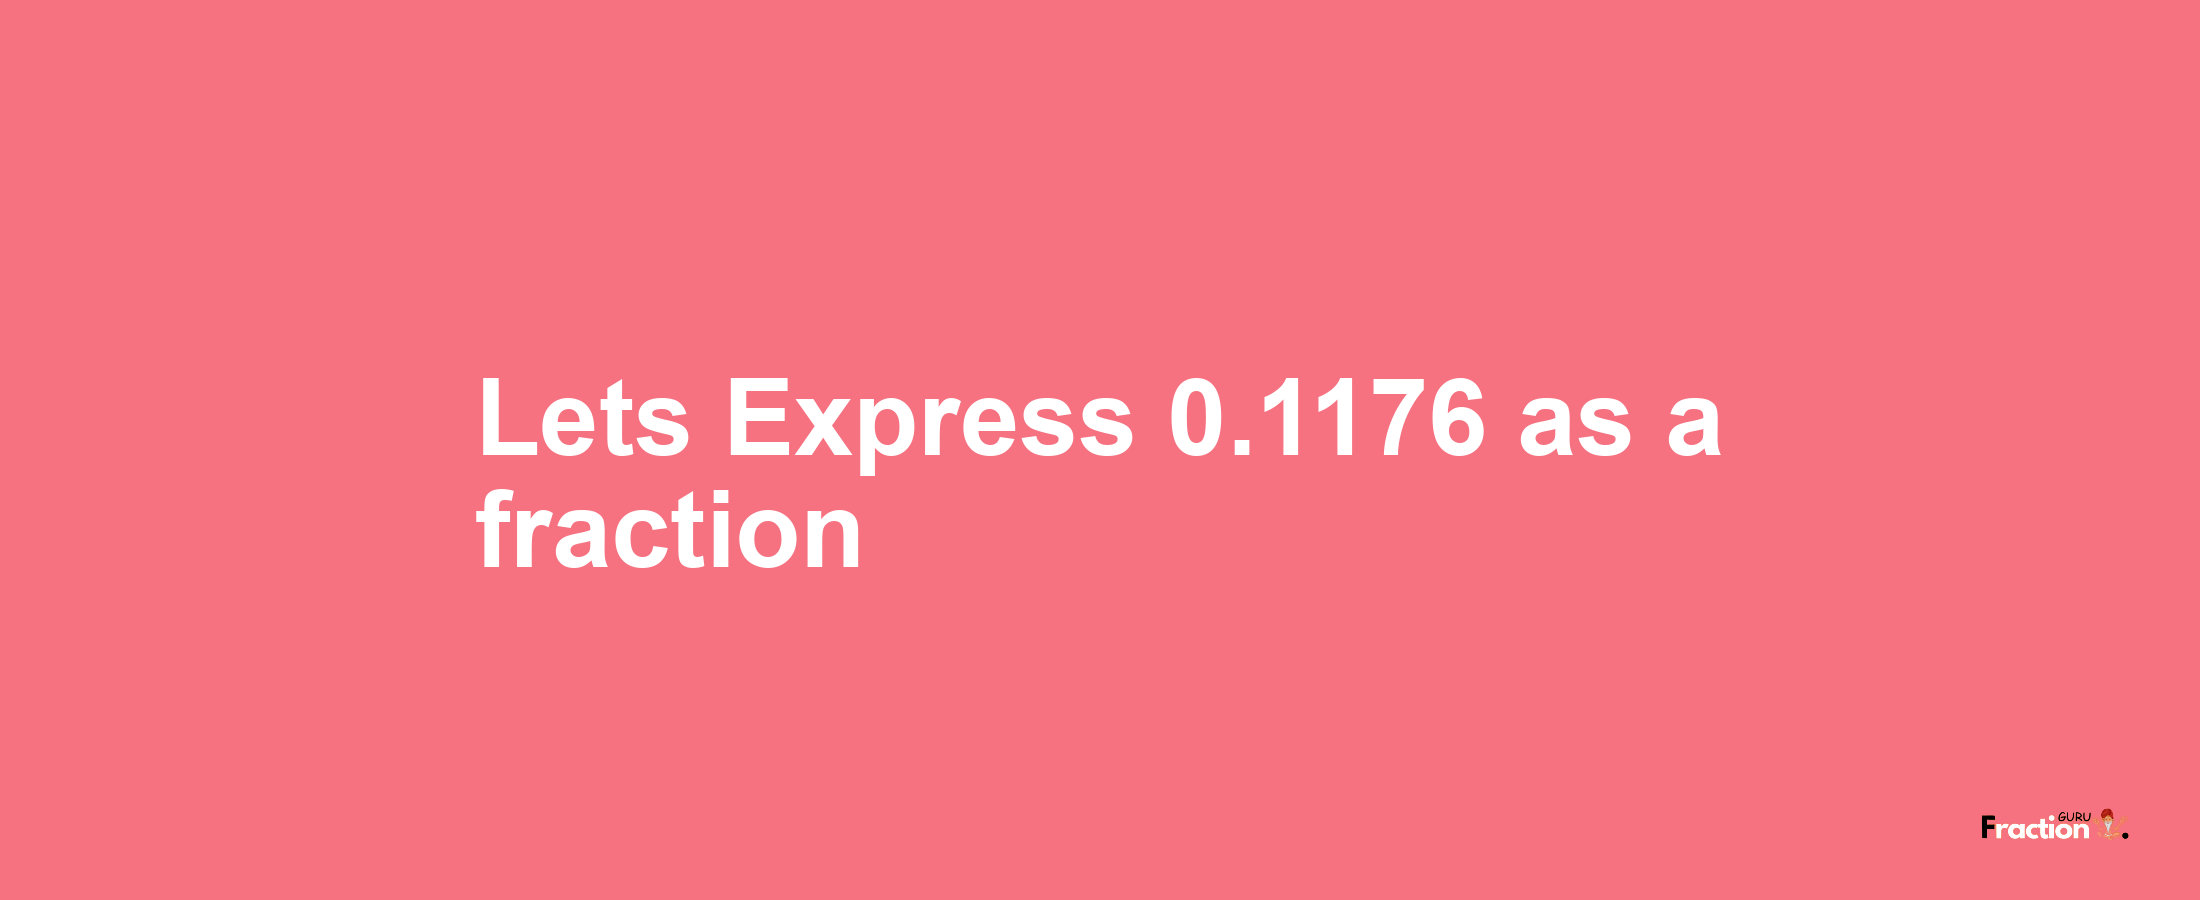 Lets Express 0.1176 as afraction